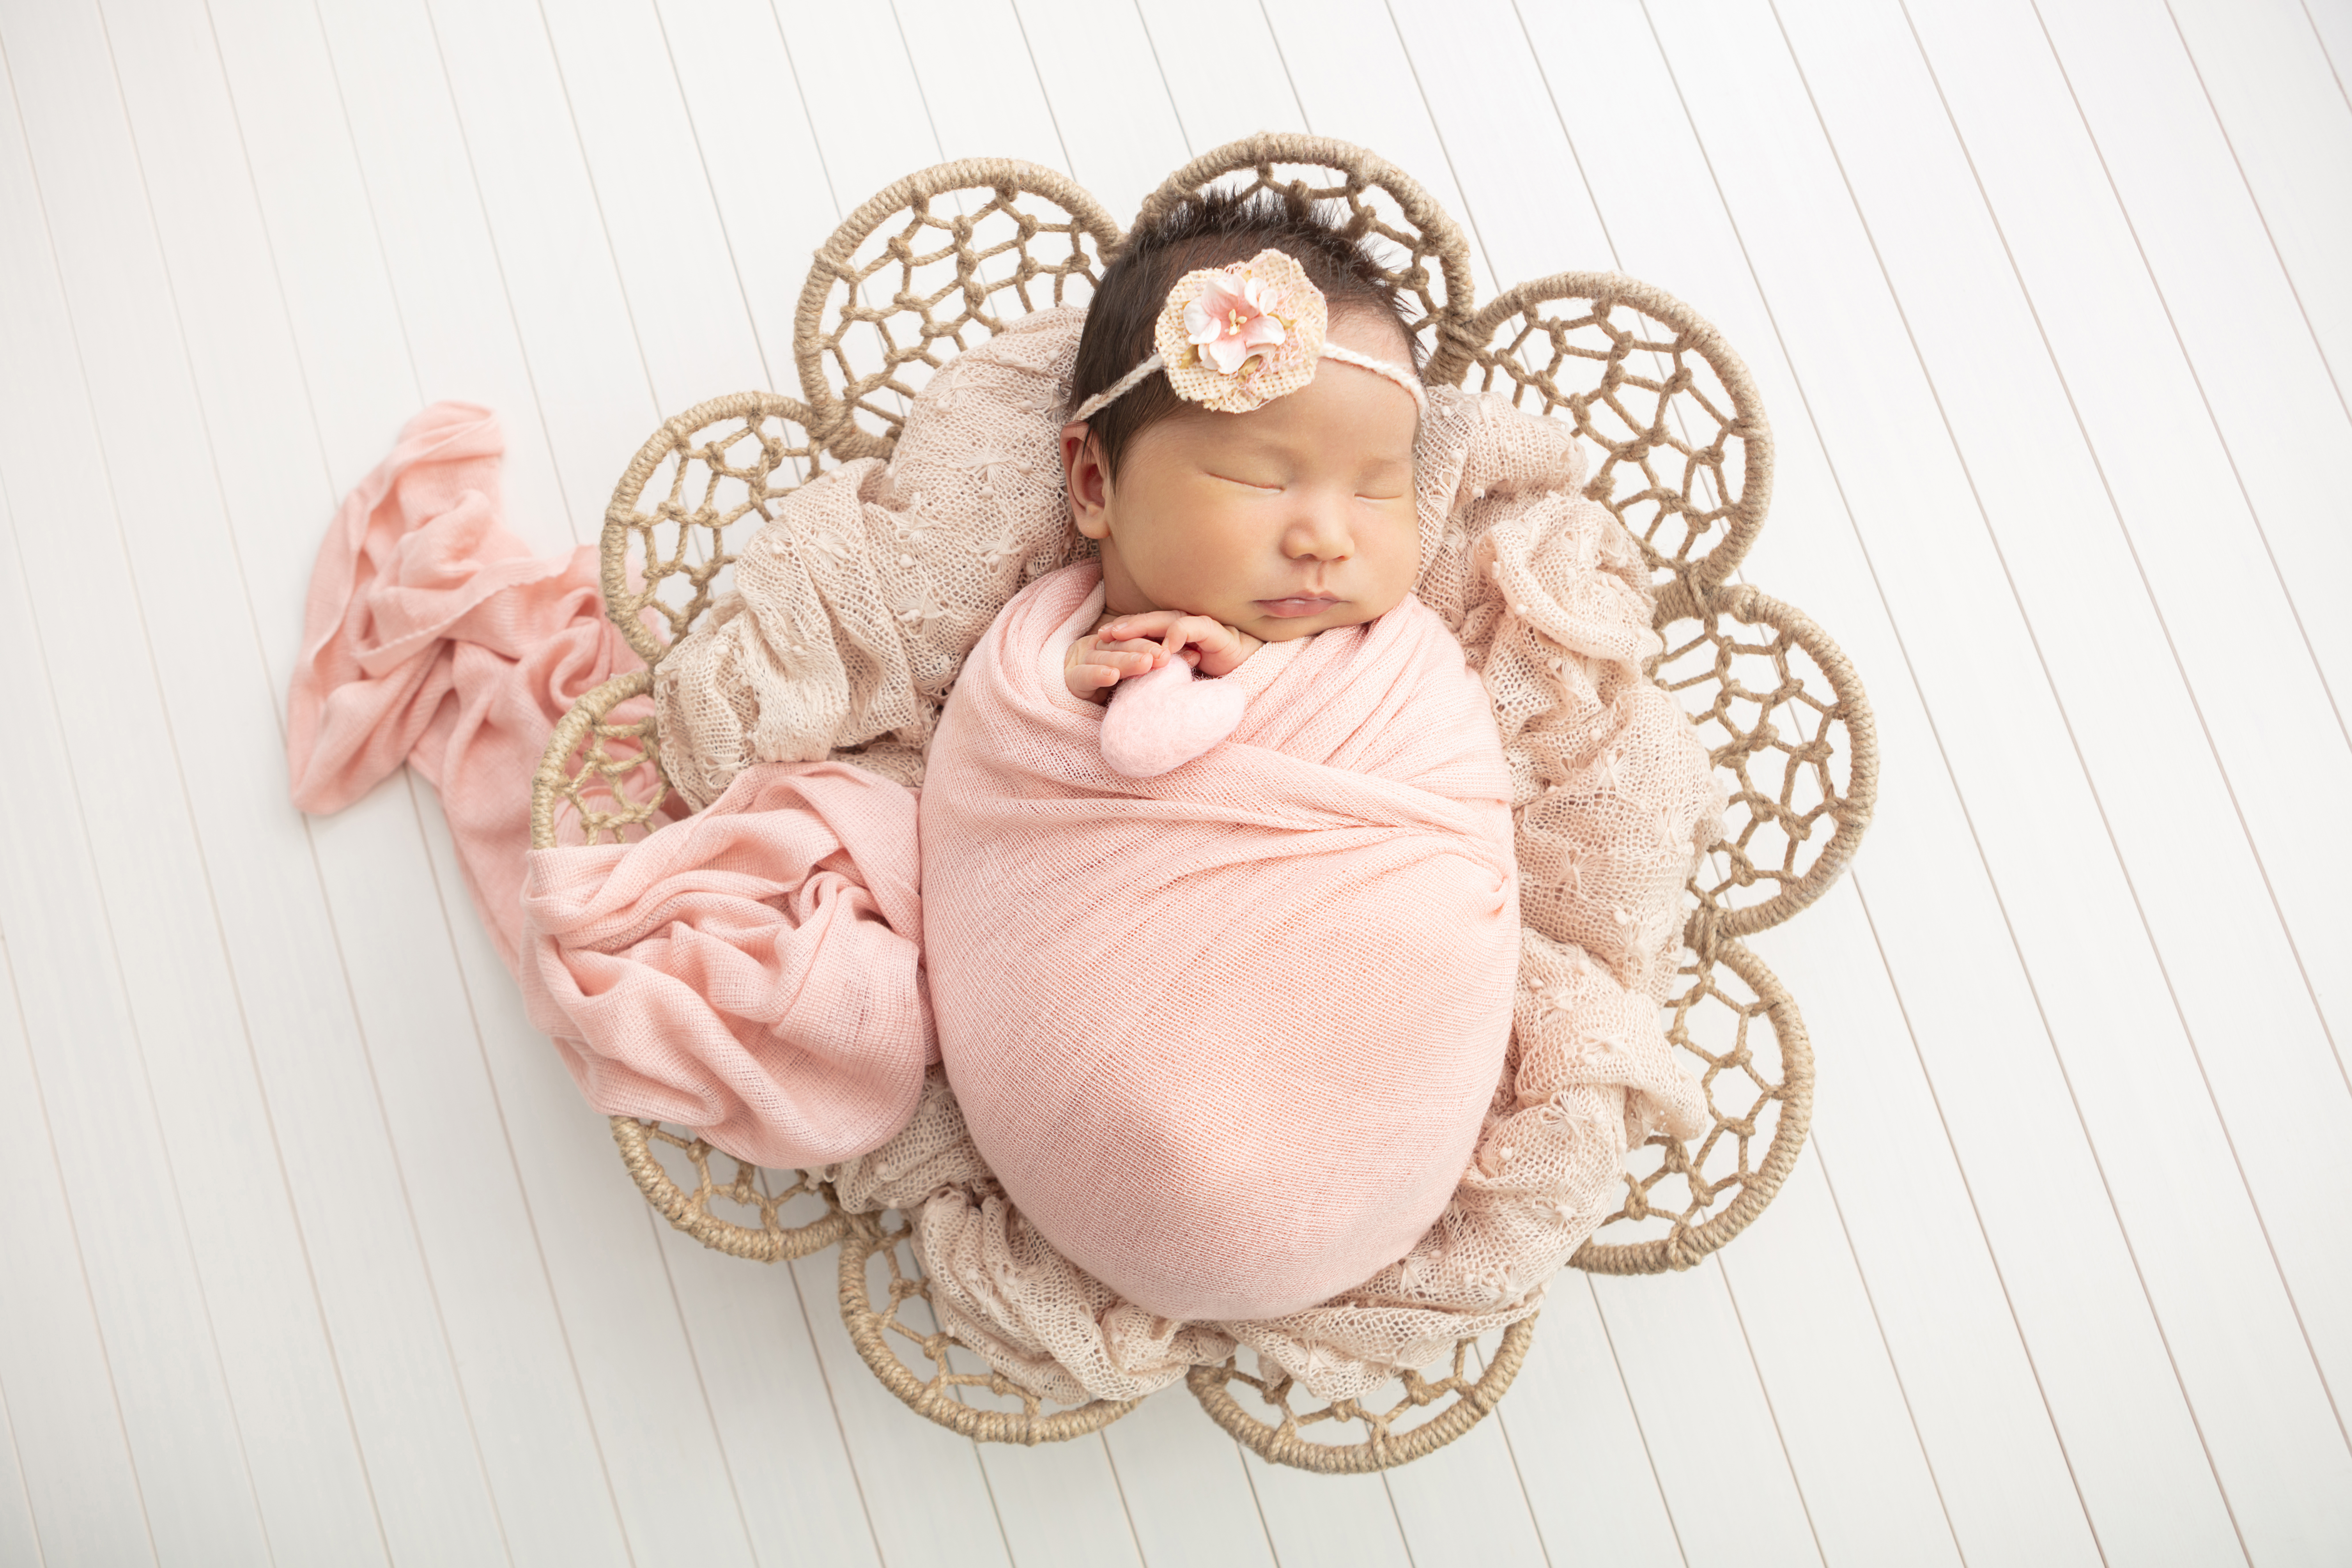 baby girl with dark hair wrapped in a peachy pink swaddle trailing out of a flower shaped wicker basket, rustic white wood floor, delicate peachy pink newborn headband